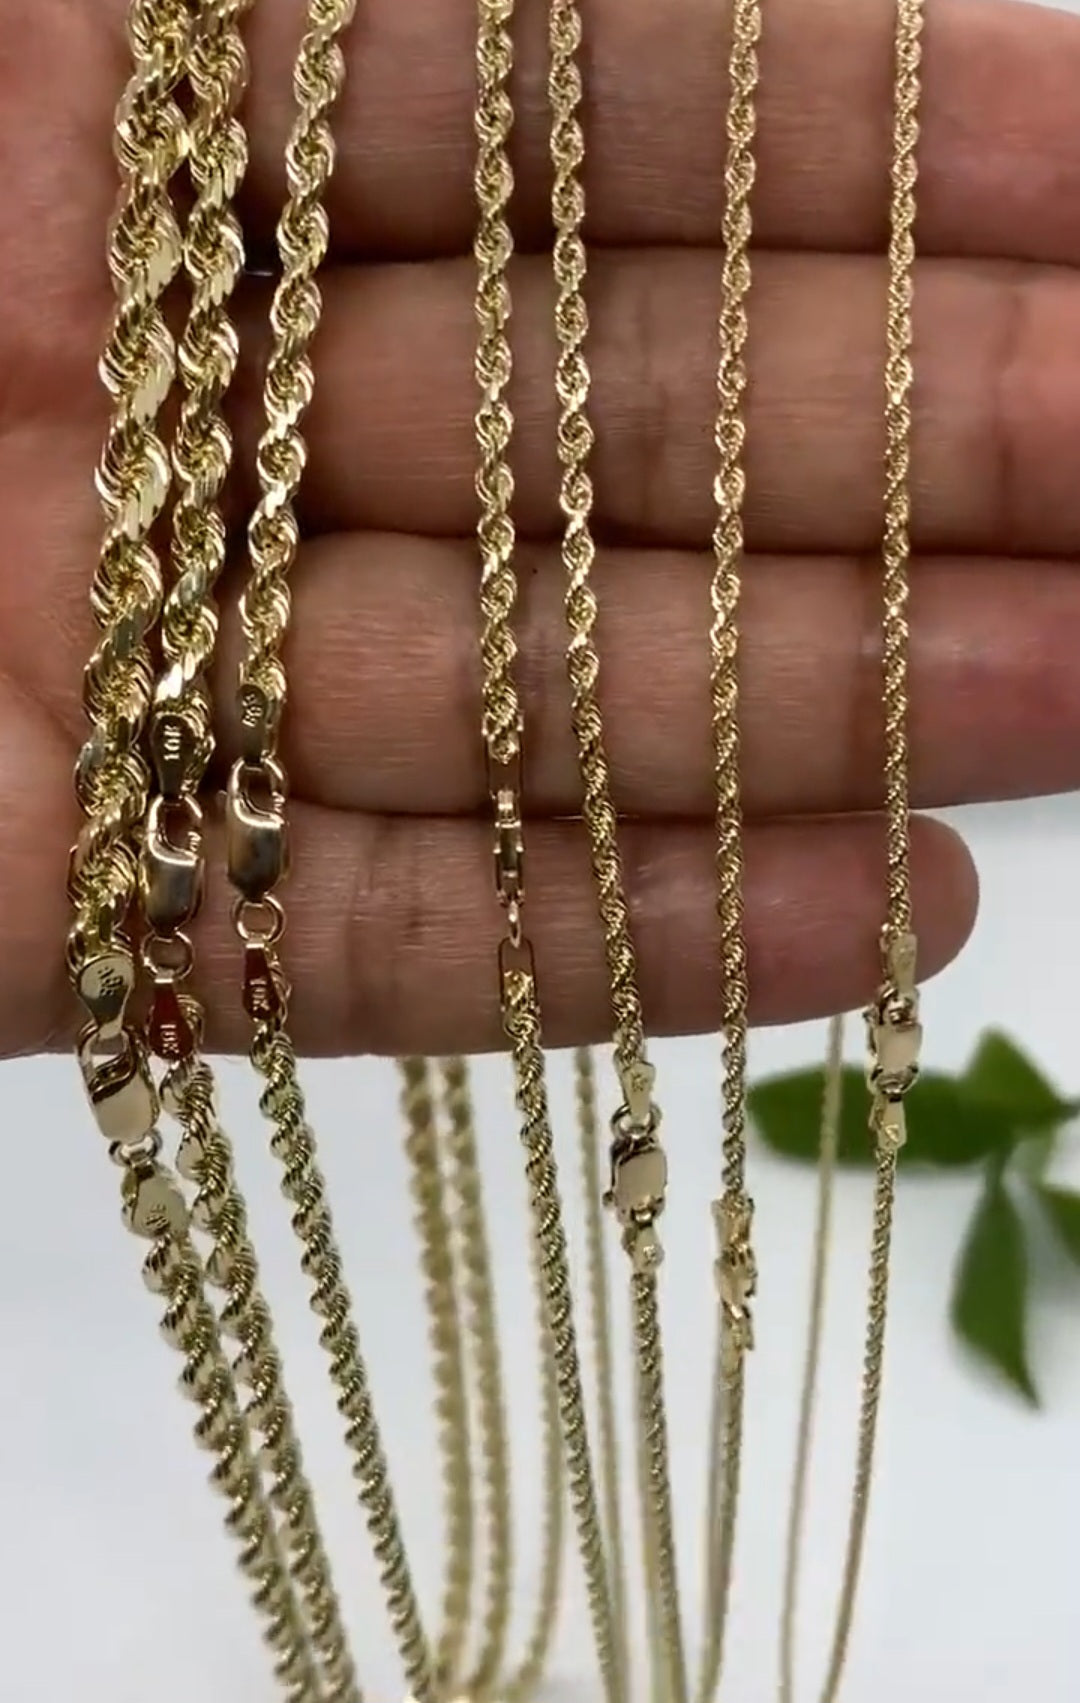 10kt Gold "Hollow" Rope chain necklace